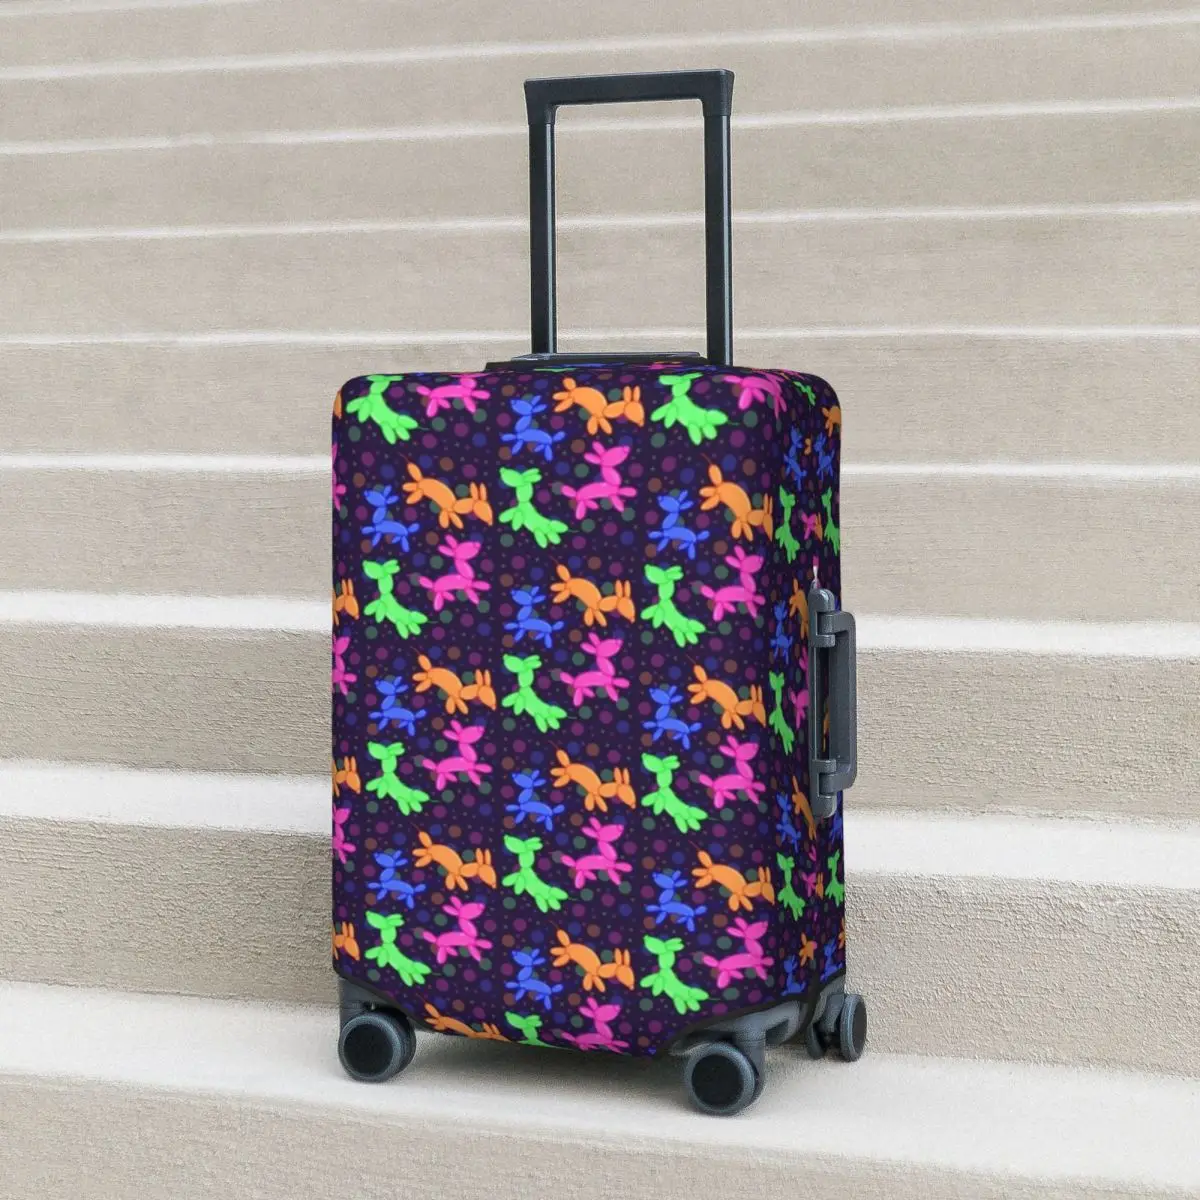 

Colorful Balloon Dog Suitcase Cover Cartoon Animal Print Travel Protection Flight Fun Luggage Accesories